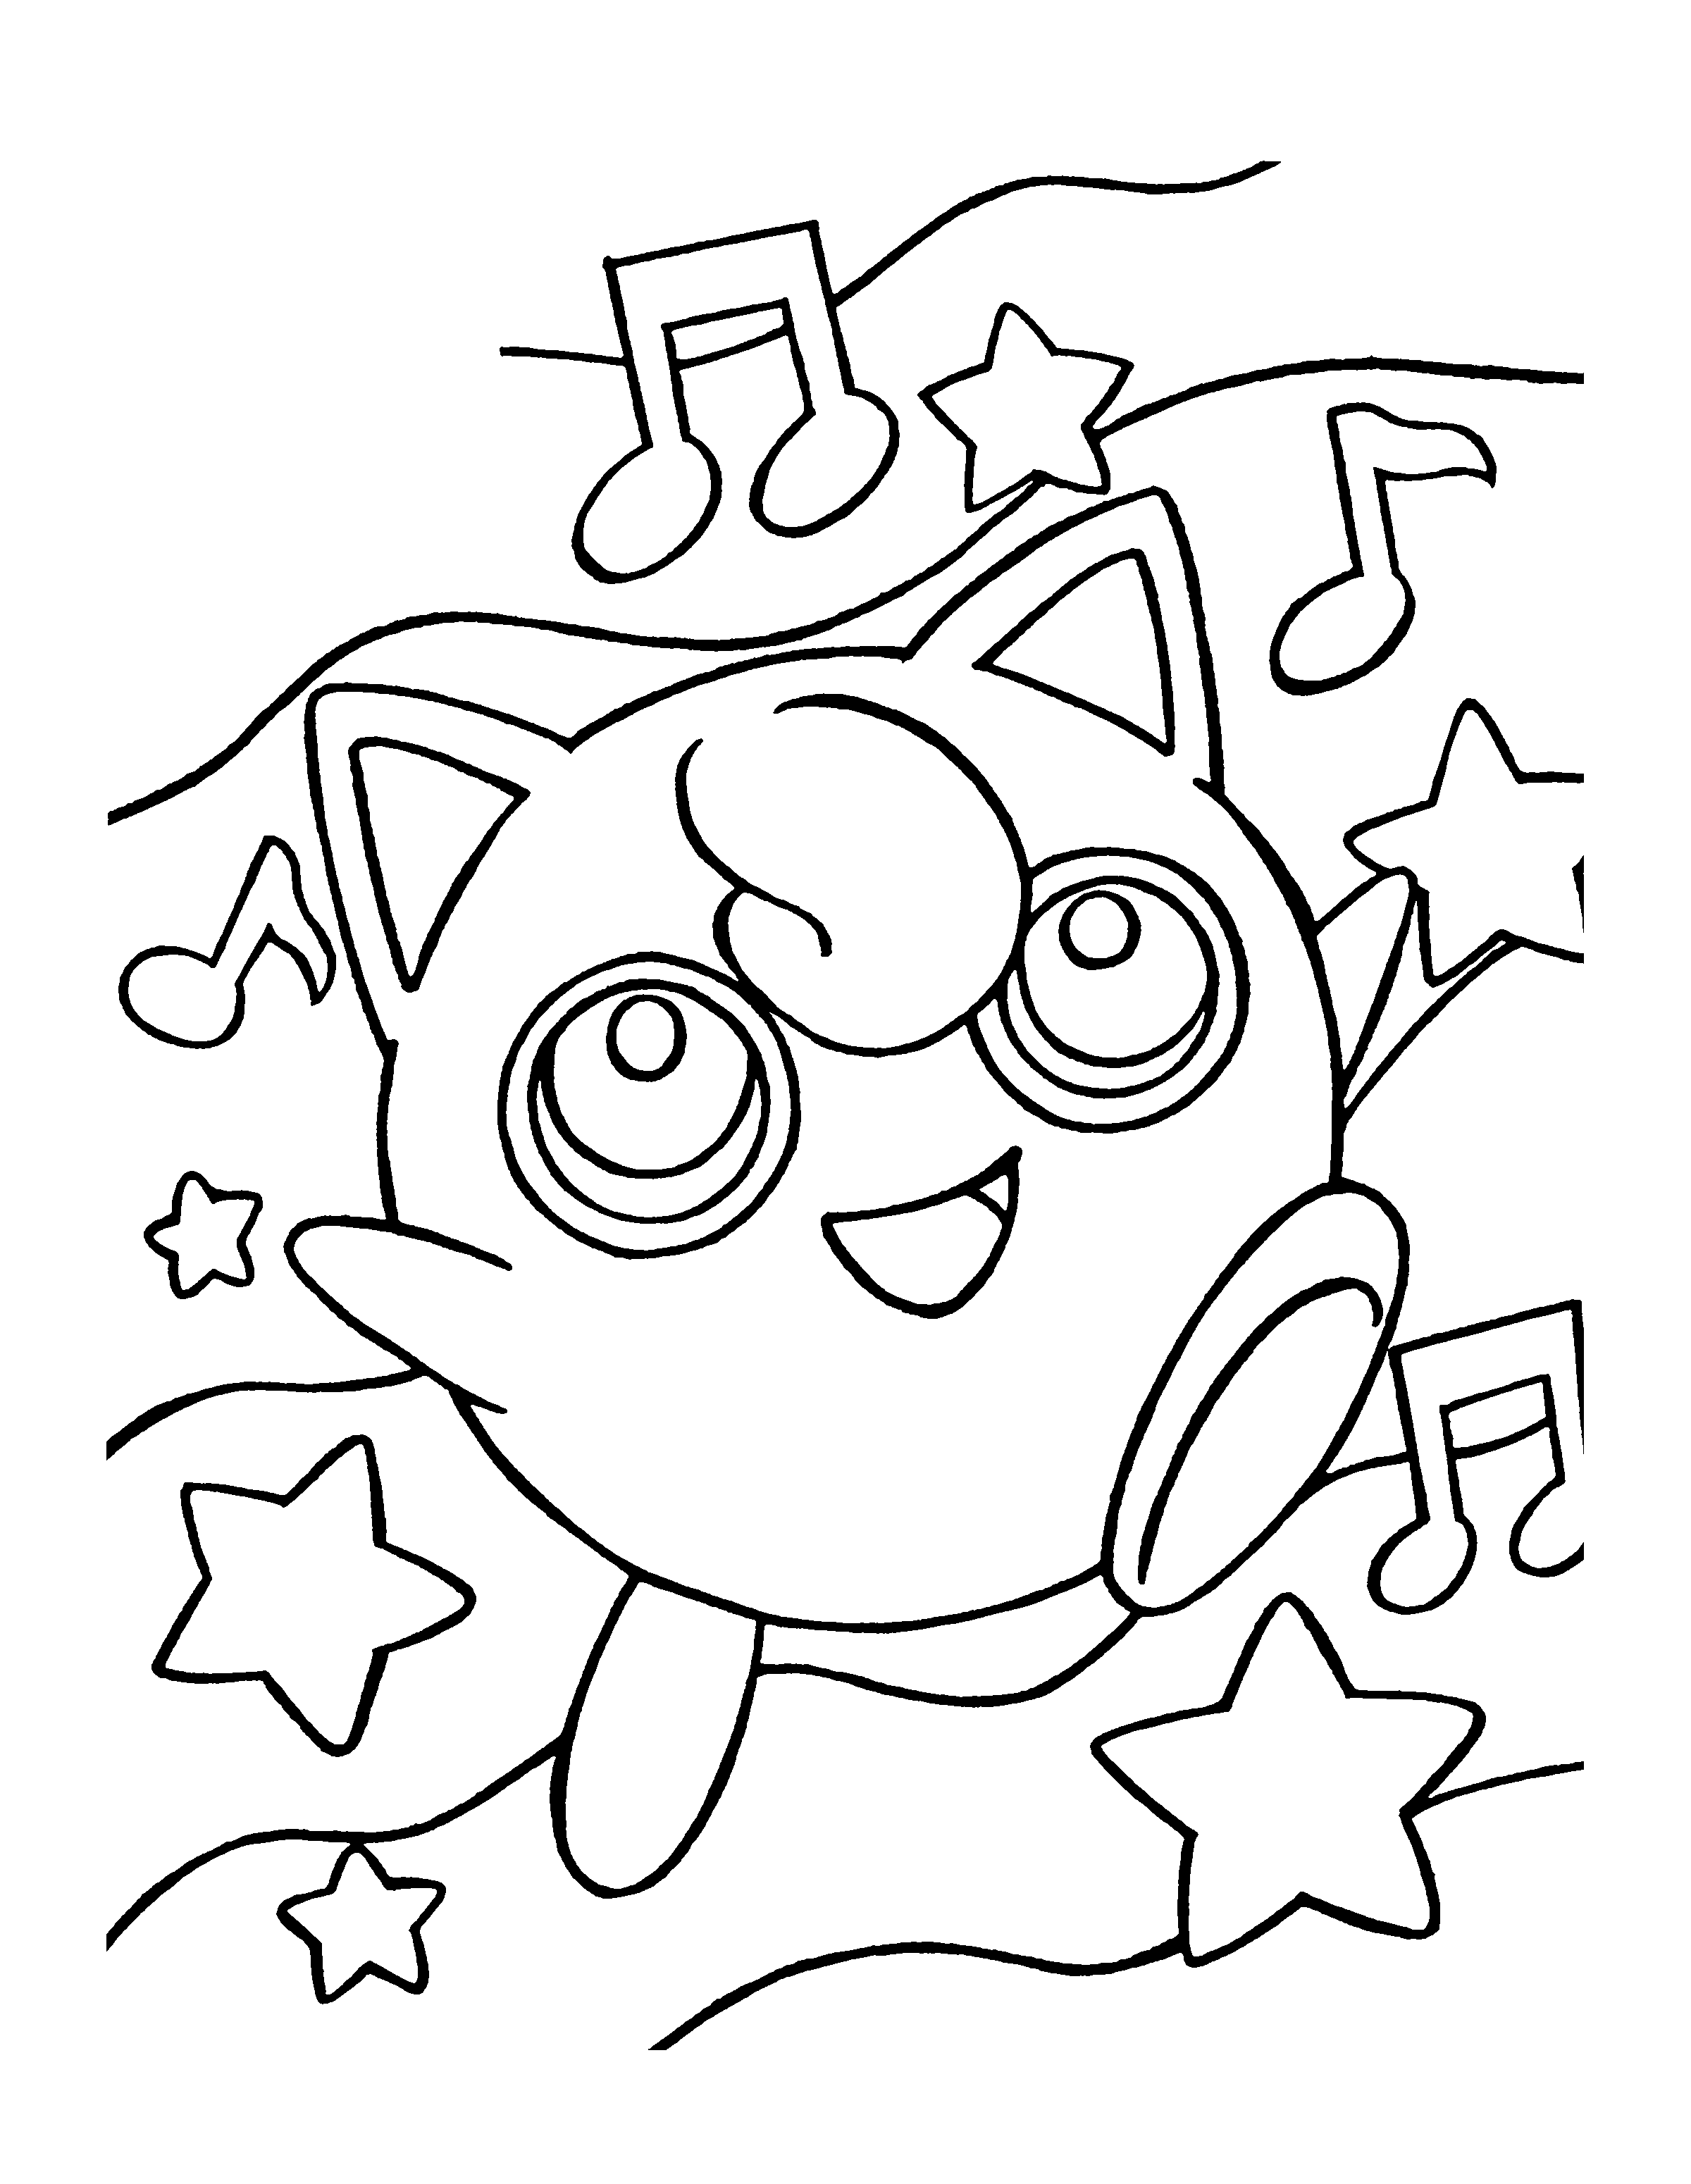 Free Pokemon | Coloring Pages For Adults, Download Free Pokemon